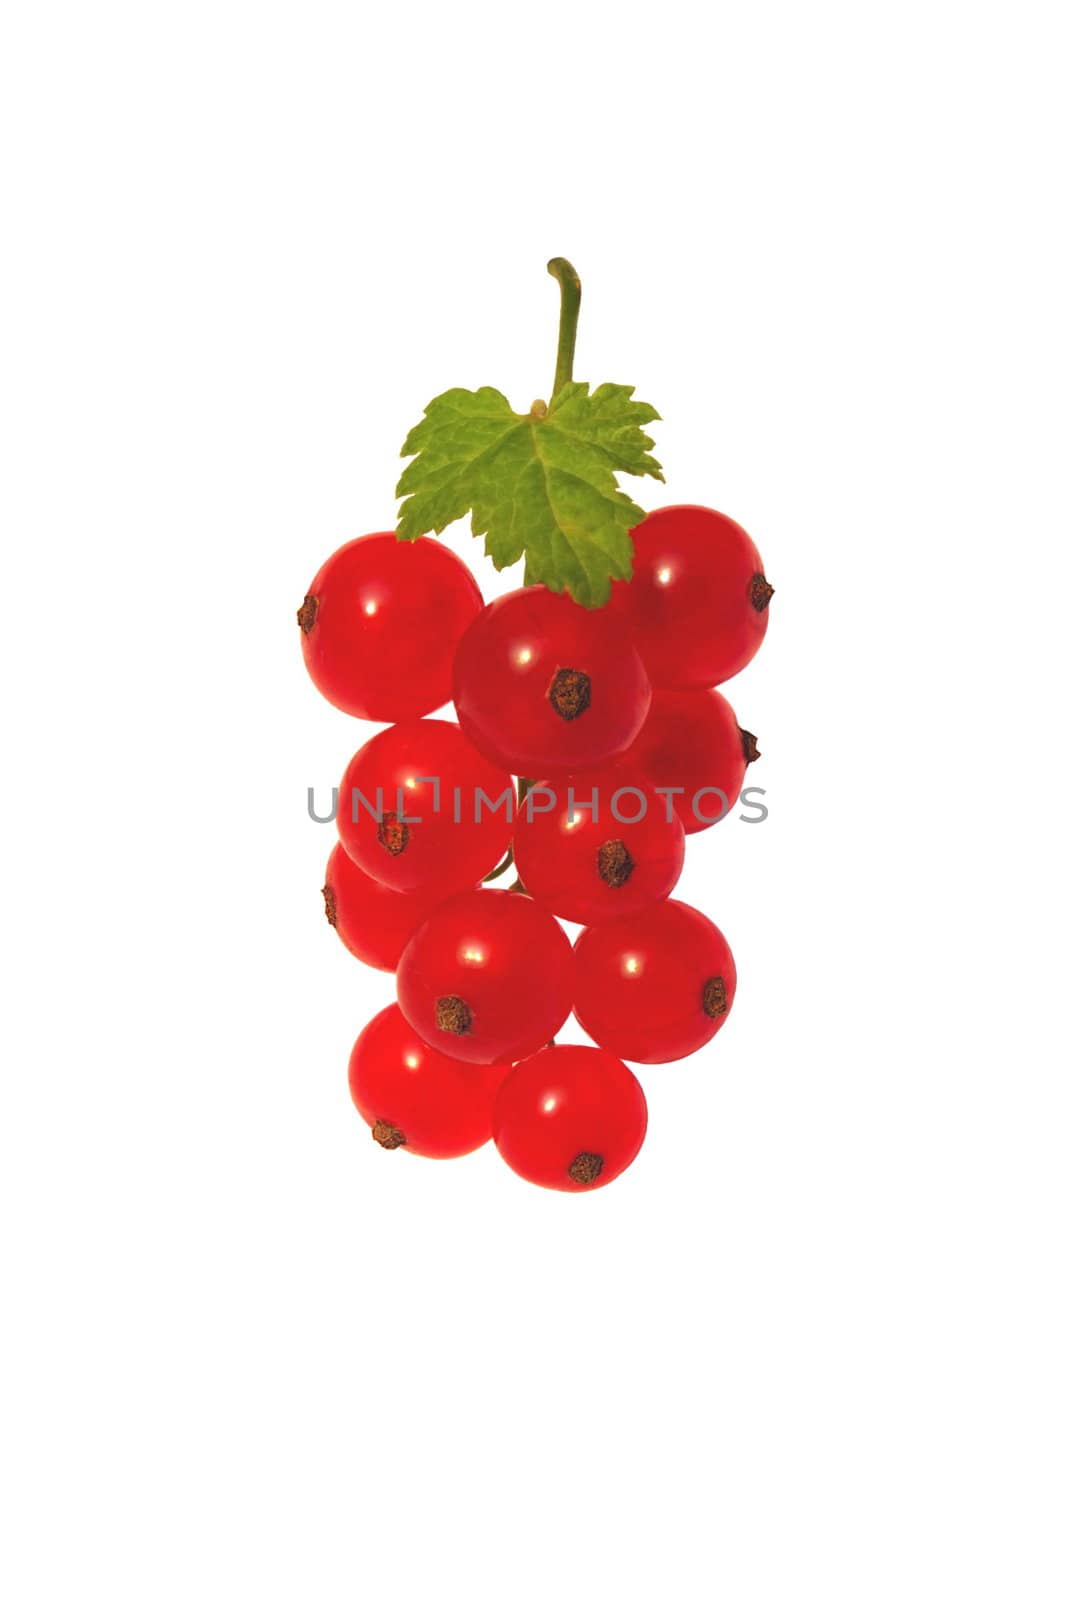 Berries of a red currant on a branch